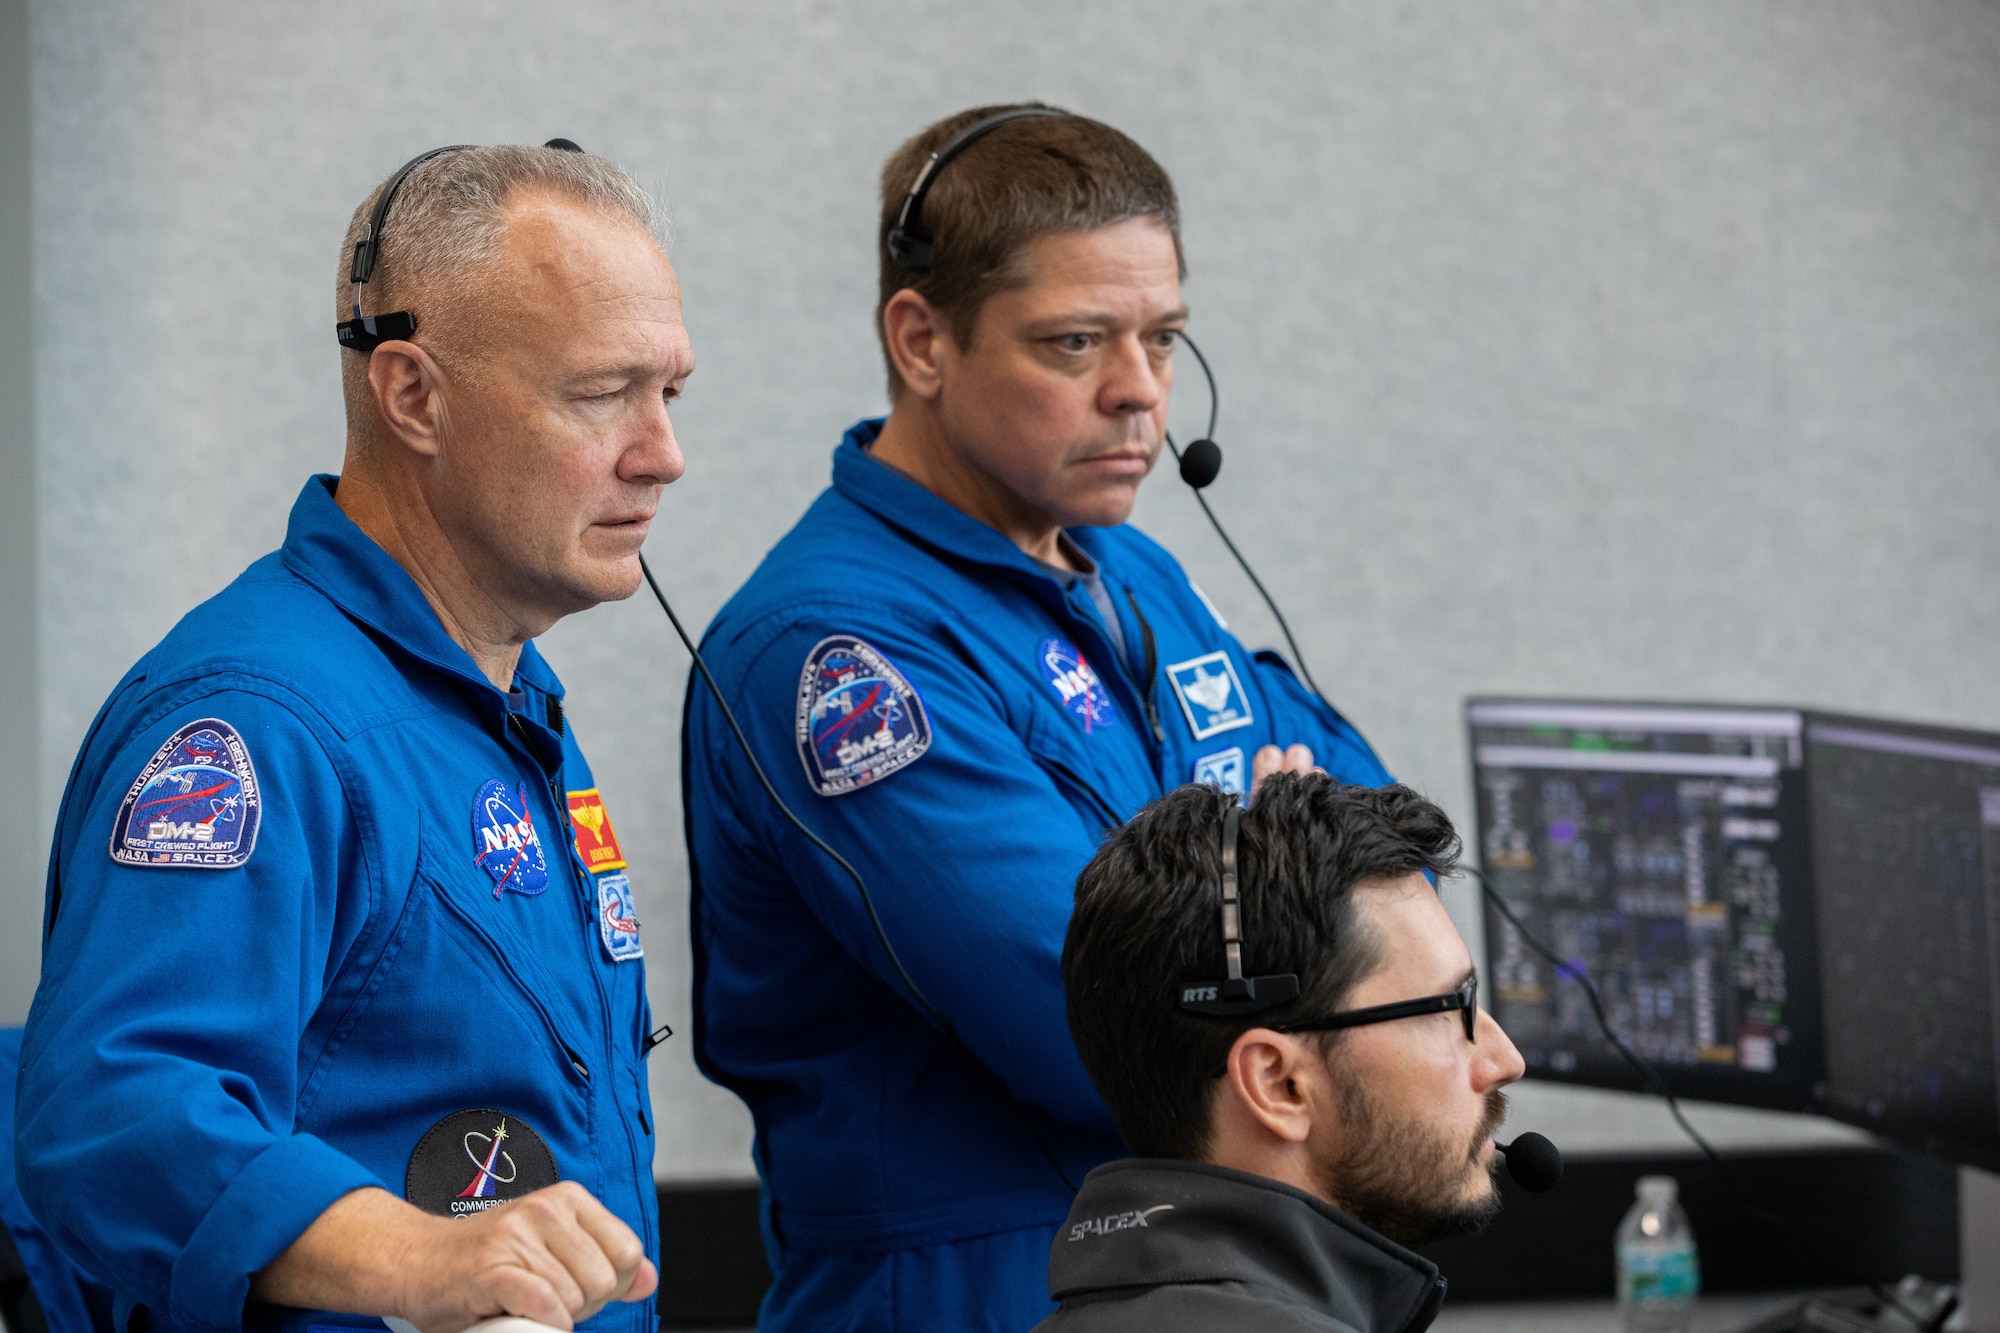 NASA astronauts Doug Hurley, left, and Bob Behnken watch the liftoff of a SpaceX Falcon 9 rocket and Crew Dragon spacecraft on the uncrewed In-Flight Abort Test, Jan. 19, 2020, inside Firing Room 4 in Kennedy Space Center’s Launch Control Center. The test demonstrated the spacecraft’s escape capabilities in preparation for crewed flights to the International Space Station as part of the agency’s Commercial Crew Program.